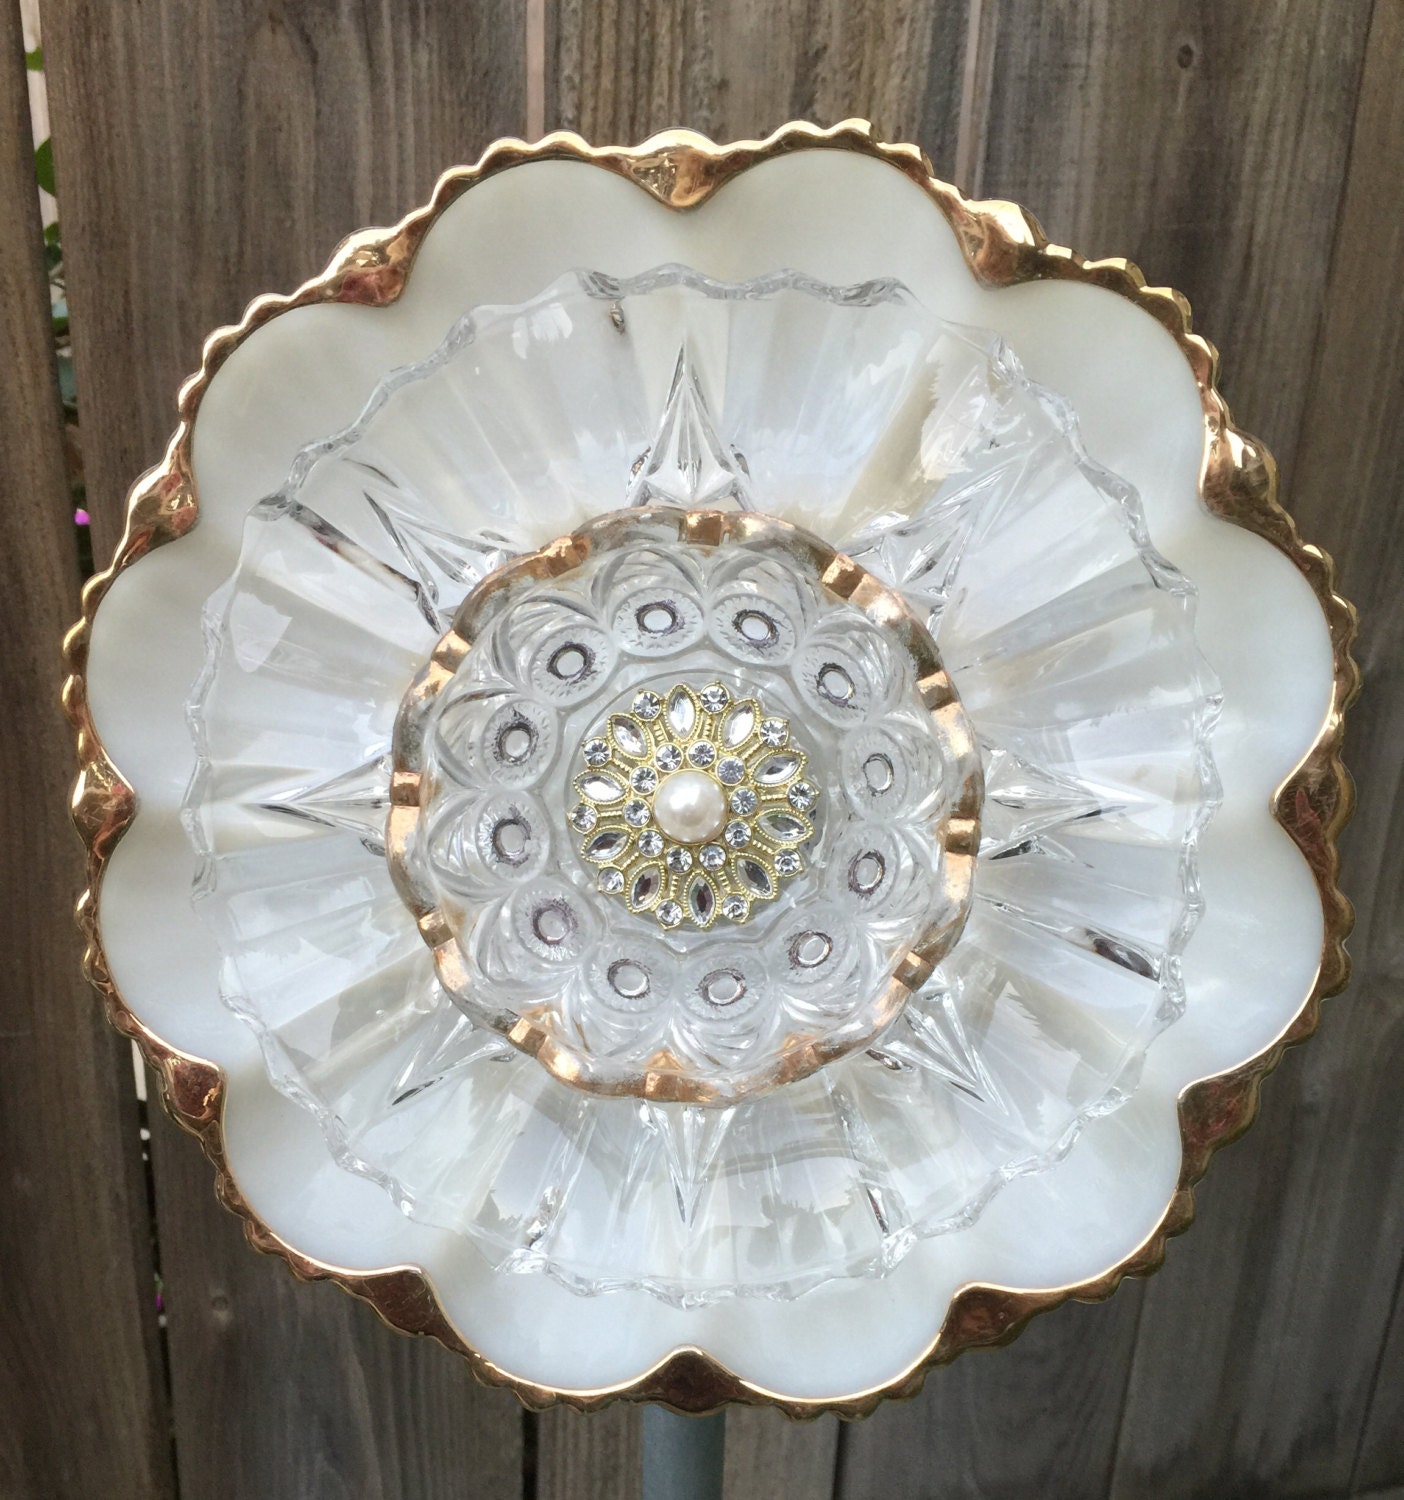 Vintage Glass Plate Flower Touch of Gold by FancysGarden on Etsy